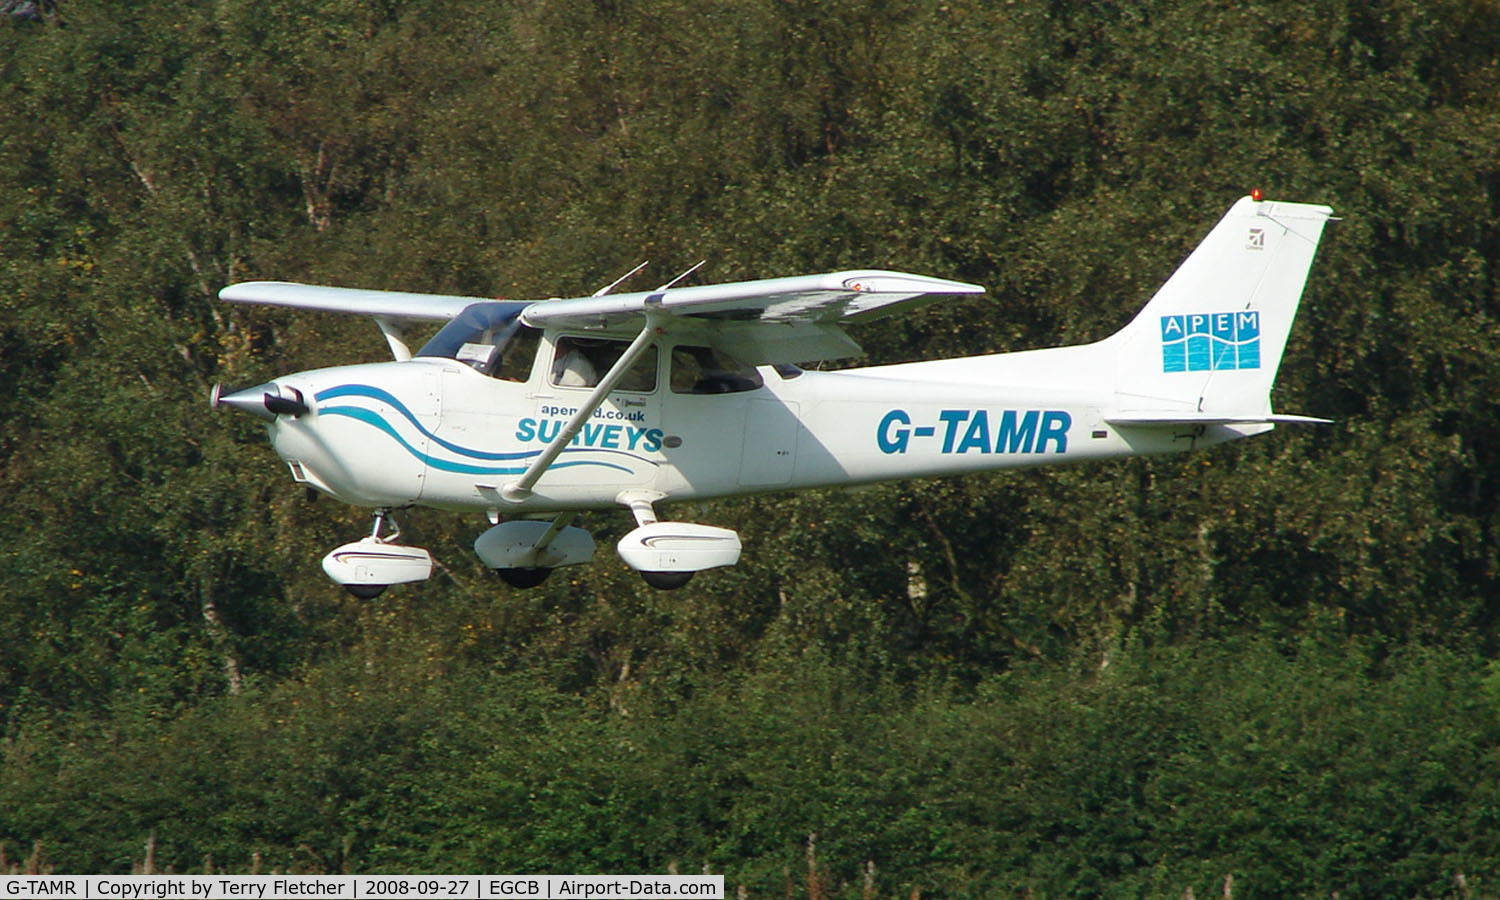 G-TAMR, 2000 Cessna 172S C/N 172S8480, Cessna 172S photographed at Manchester Barton Open Day in Sept 2008